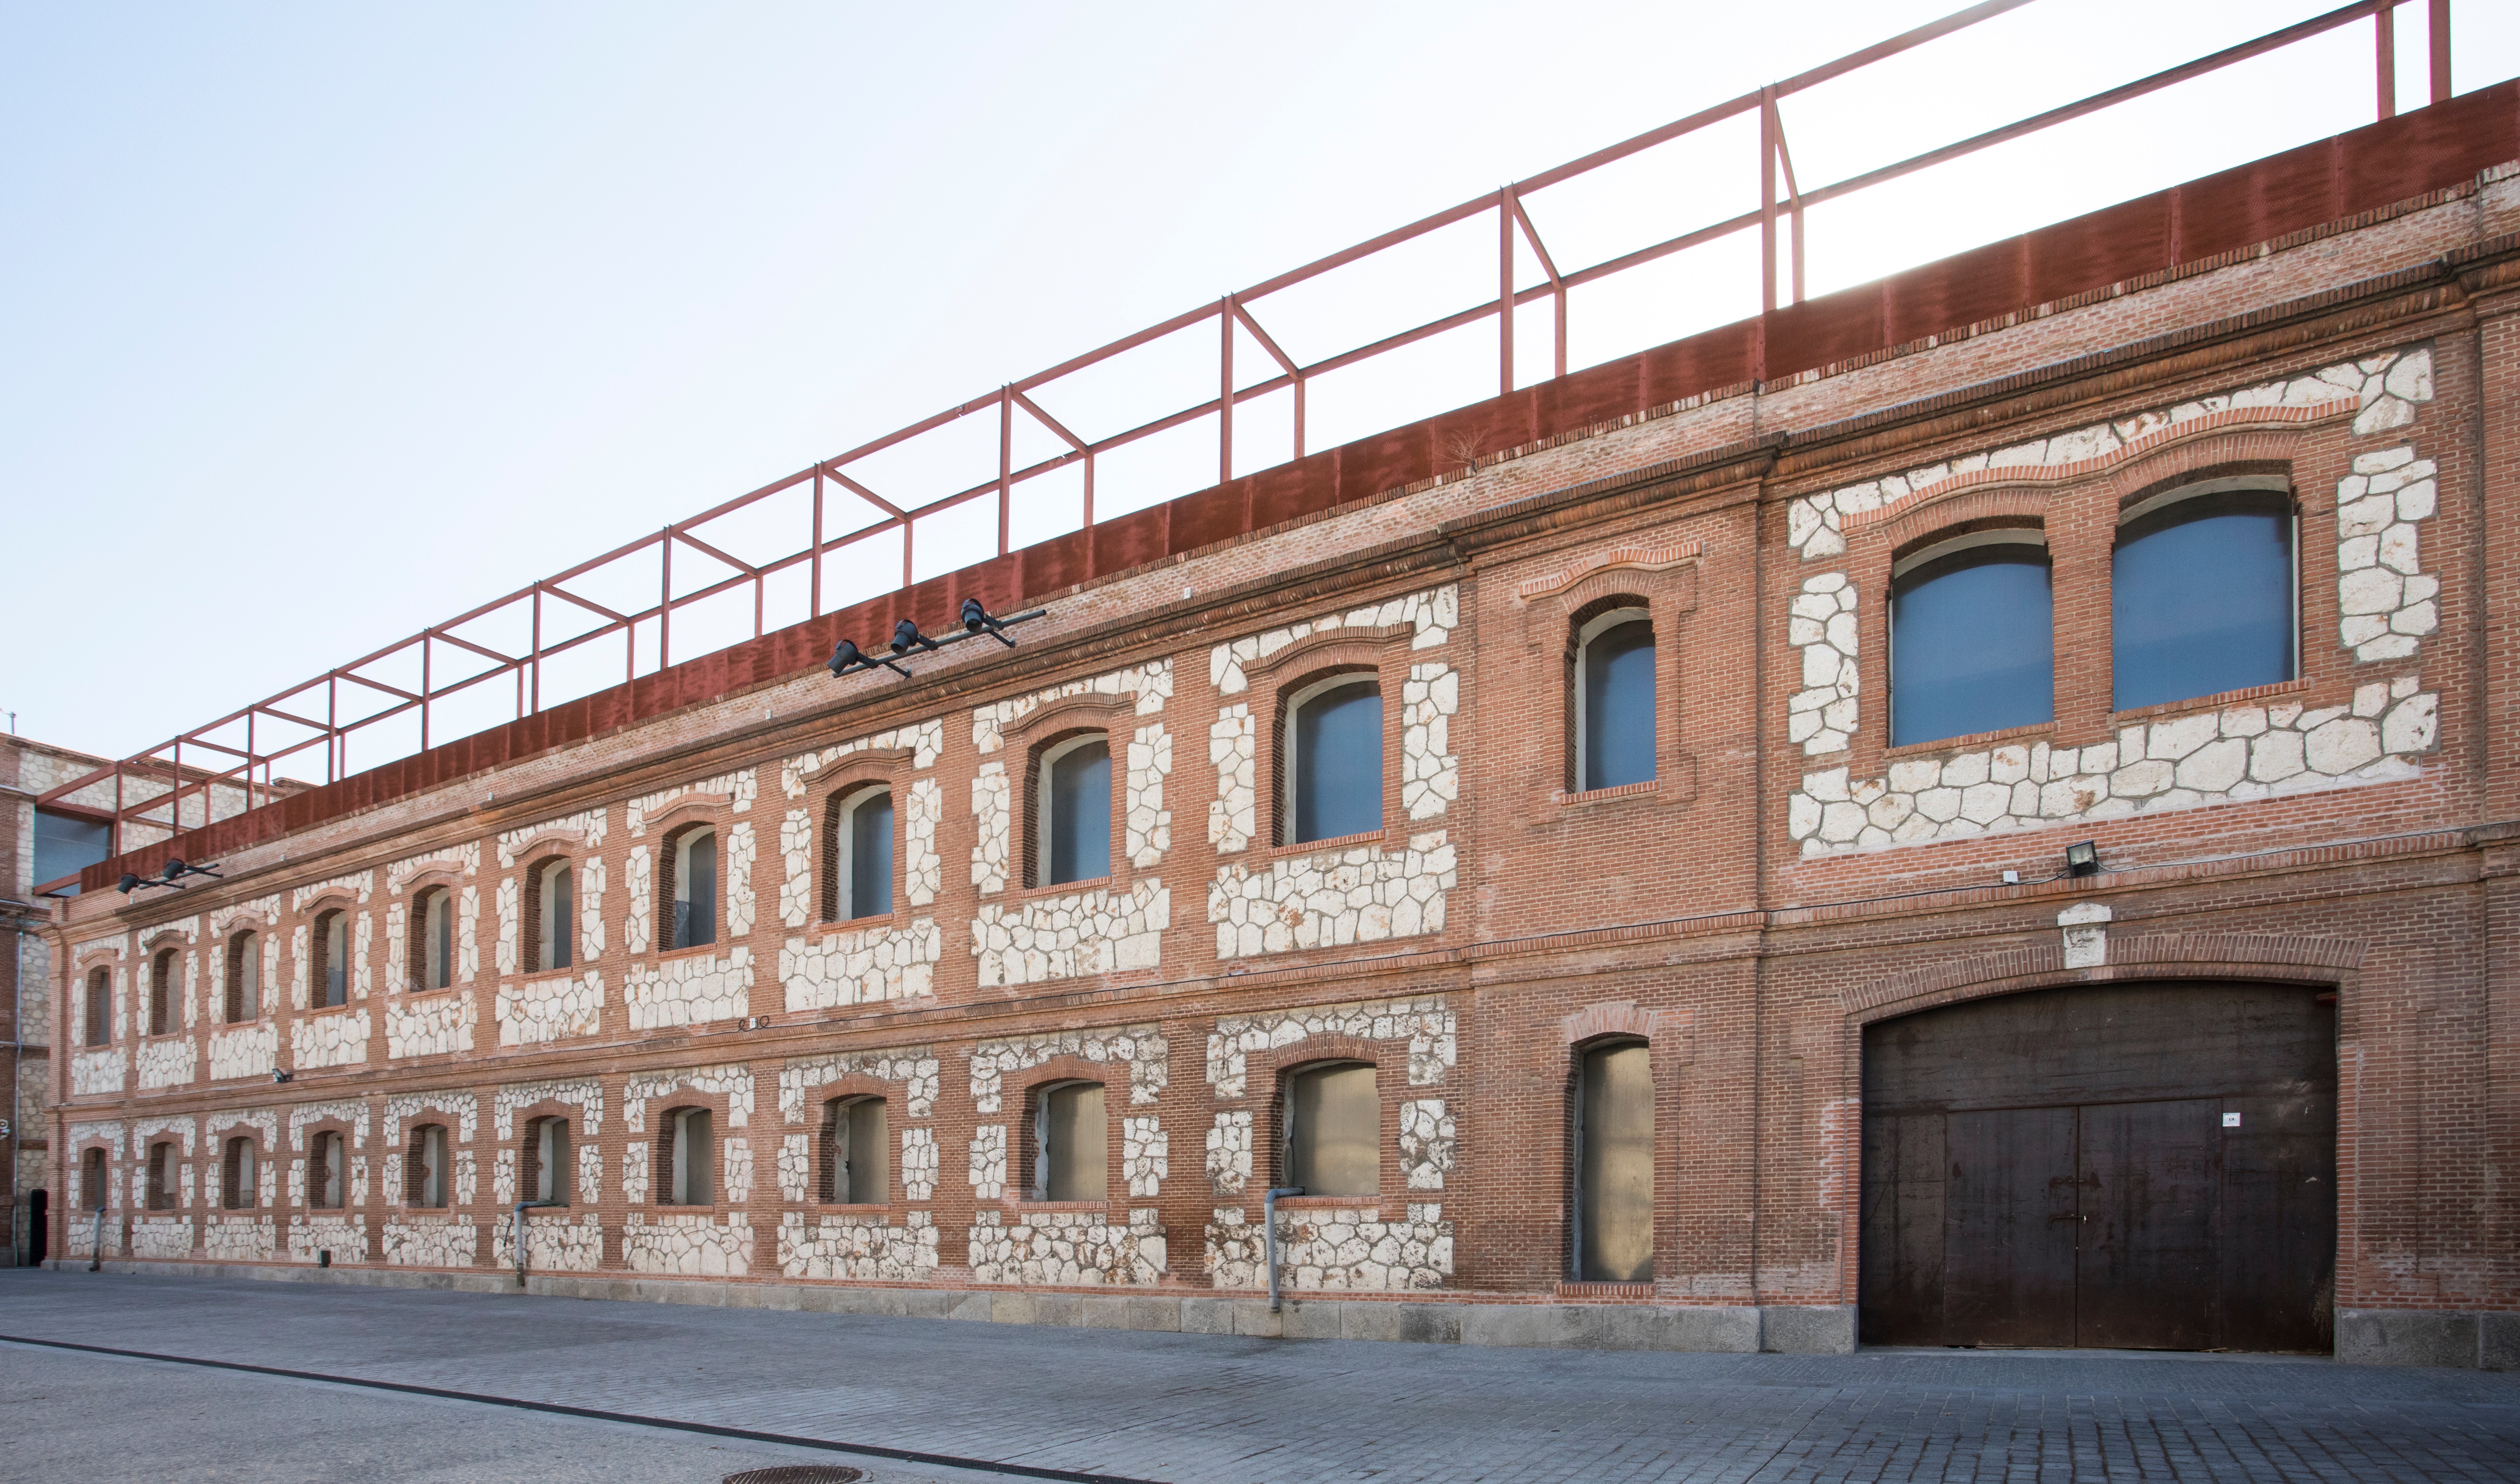 Patrizia Sandretto Re Rebaudengo commissioned David Adjaye to transform a former slaughterhouse into a museum for her expansive art collection. 